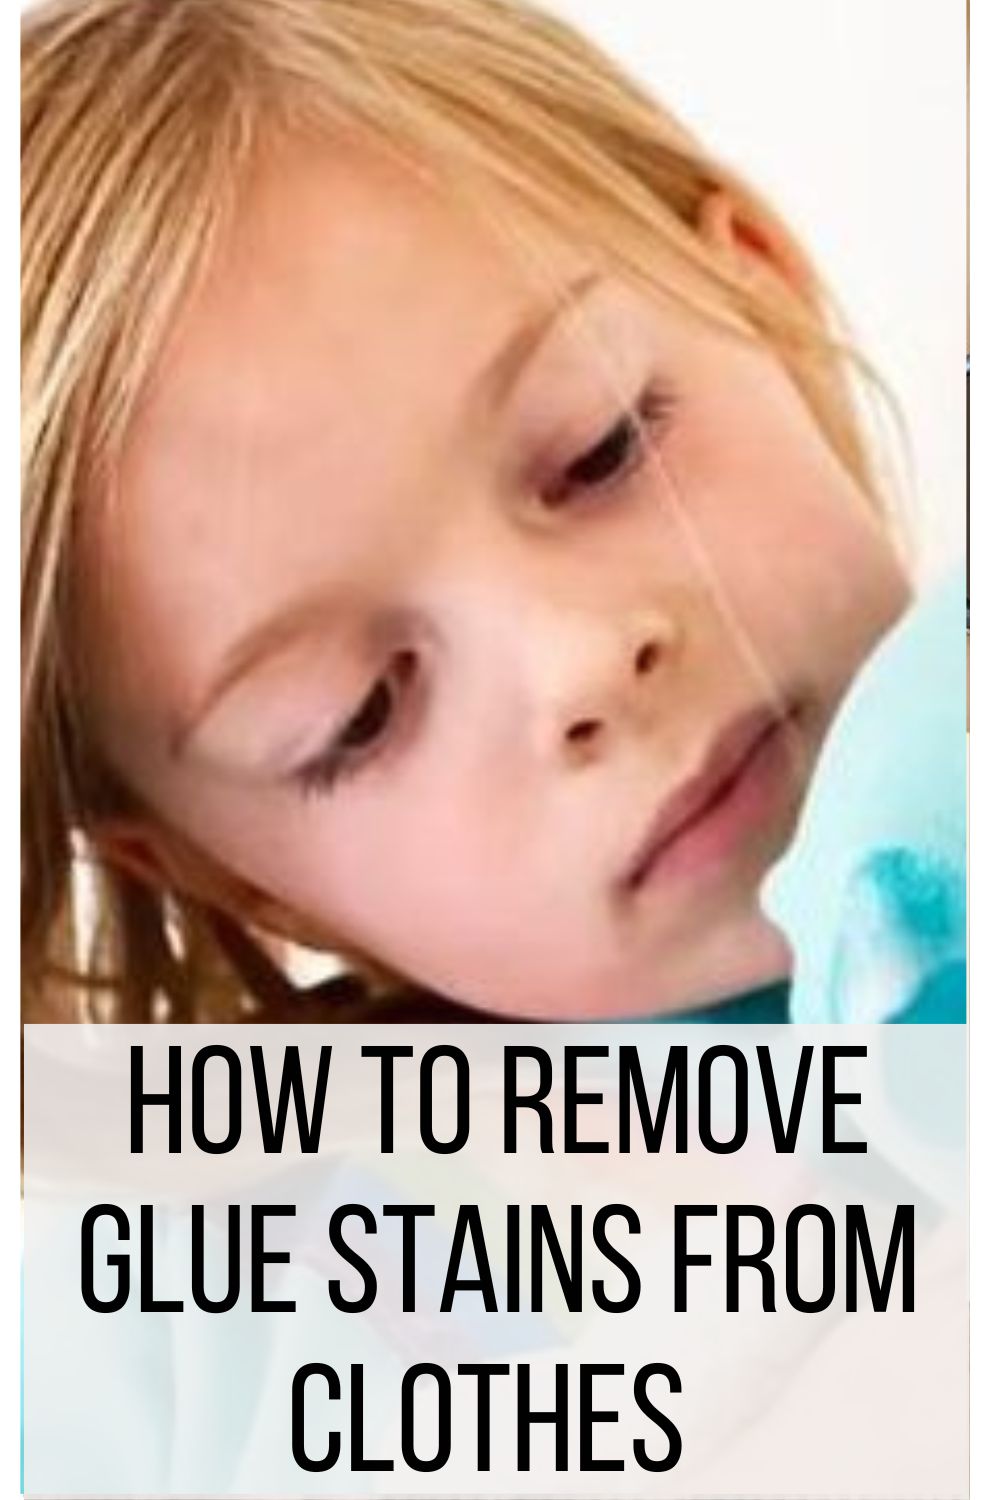 How to Remove Glue Stains from Clothes 